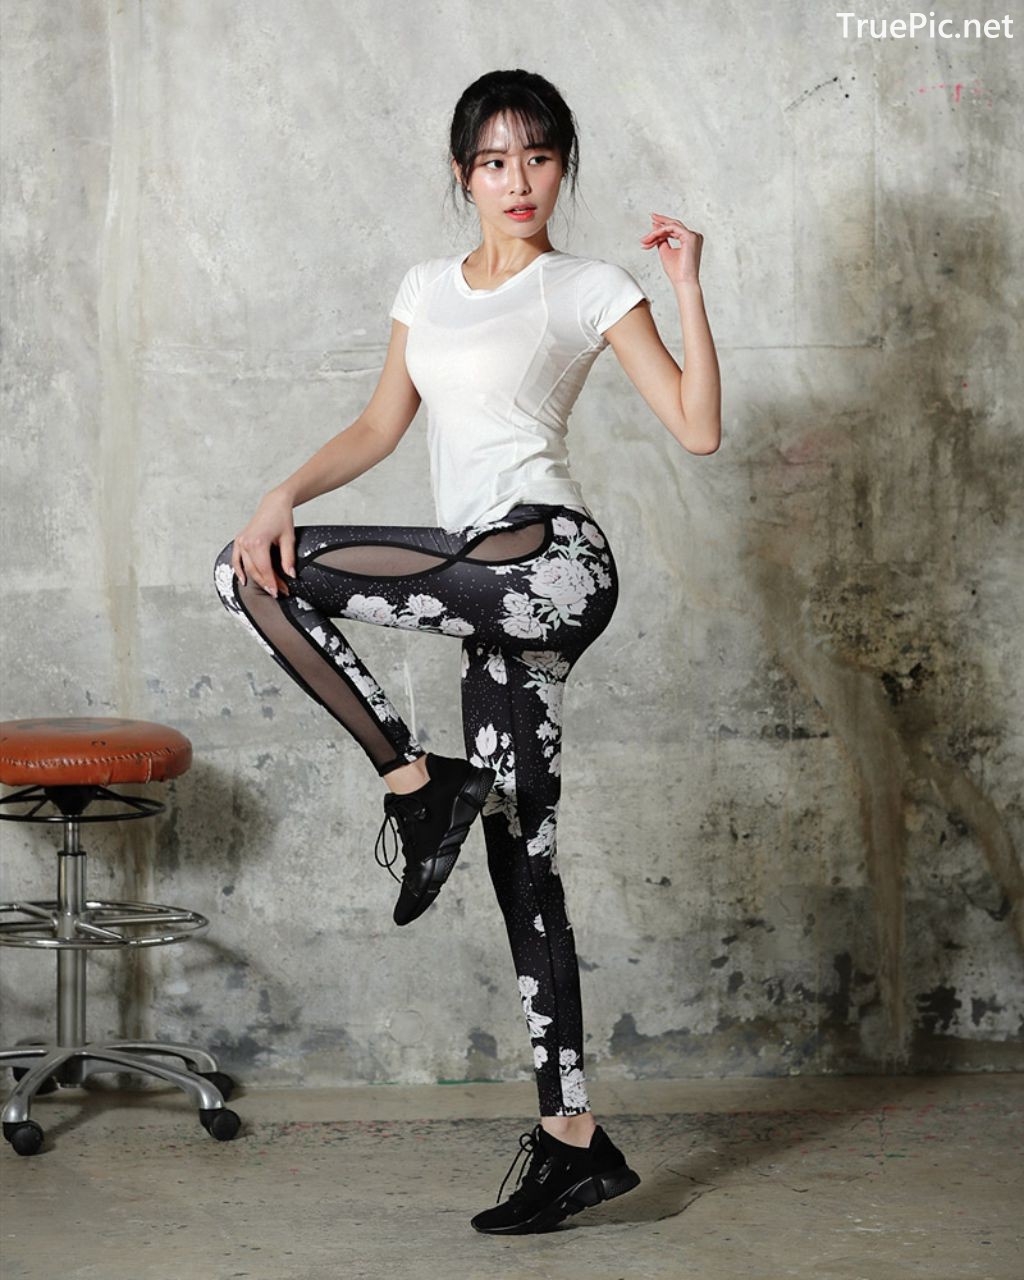 Image-Korean-Fashion-Model-Ju-Woo-Fitness-Set-Collection-TruePic.net- Picture-149